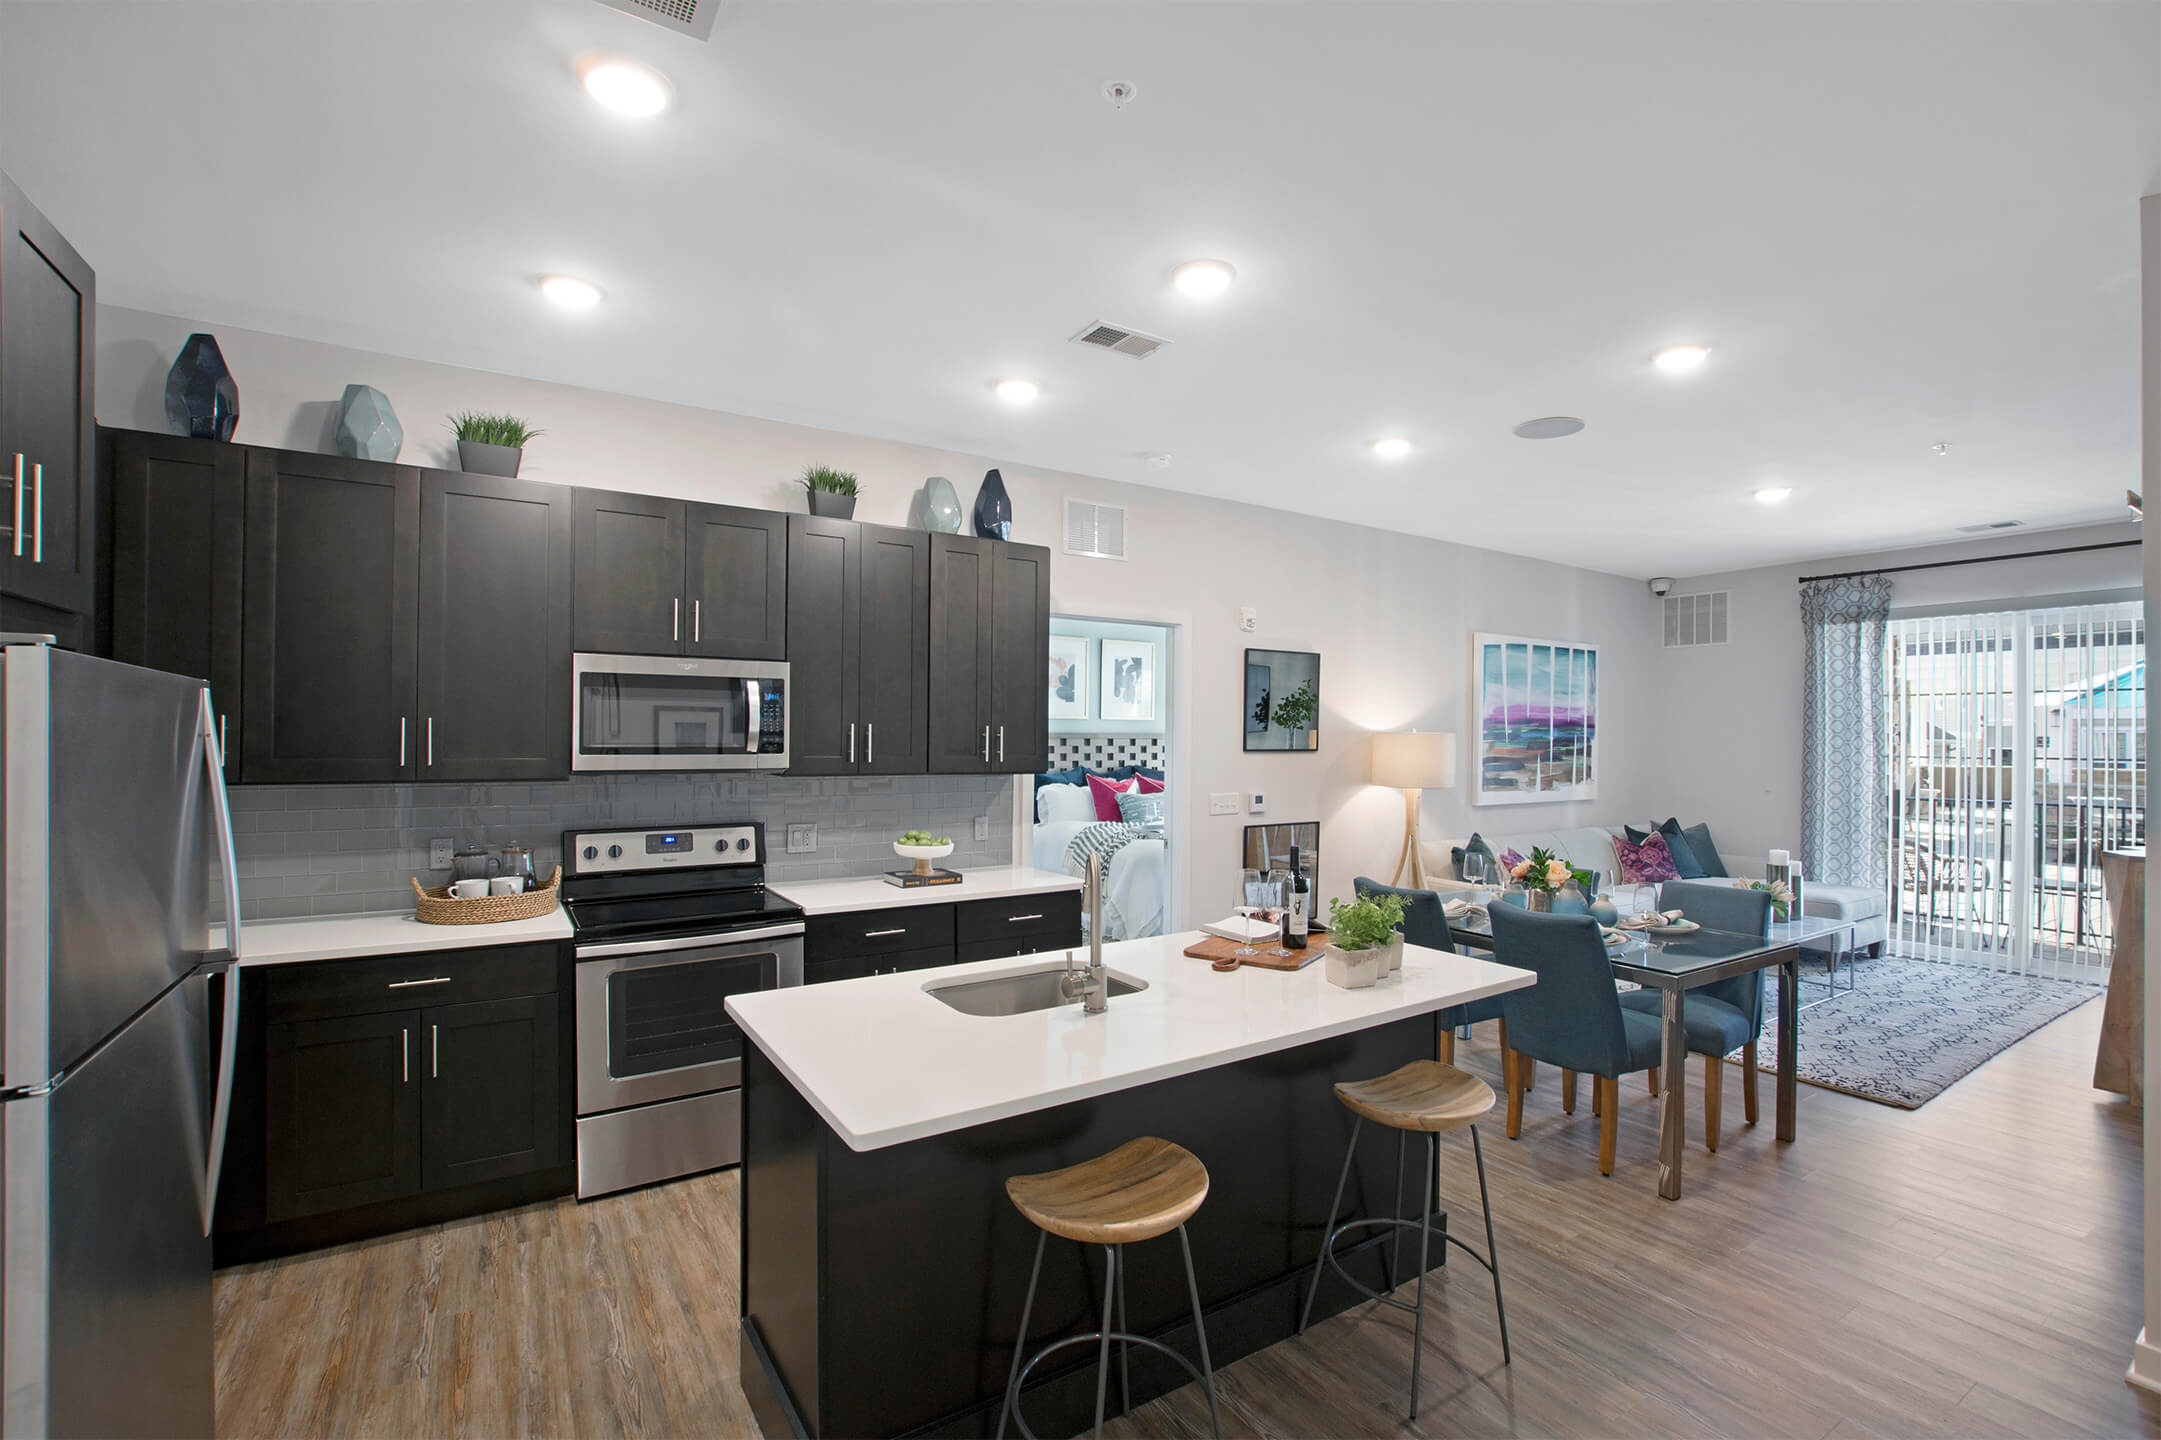 Model kitchen with modern cabinets at Parc at Roxbury, Roxbury Township, New Jersey